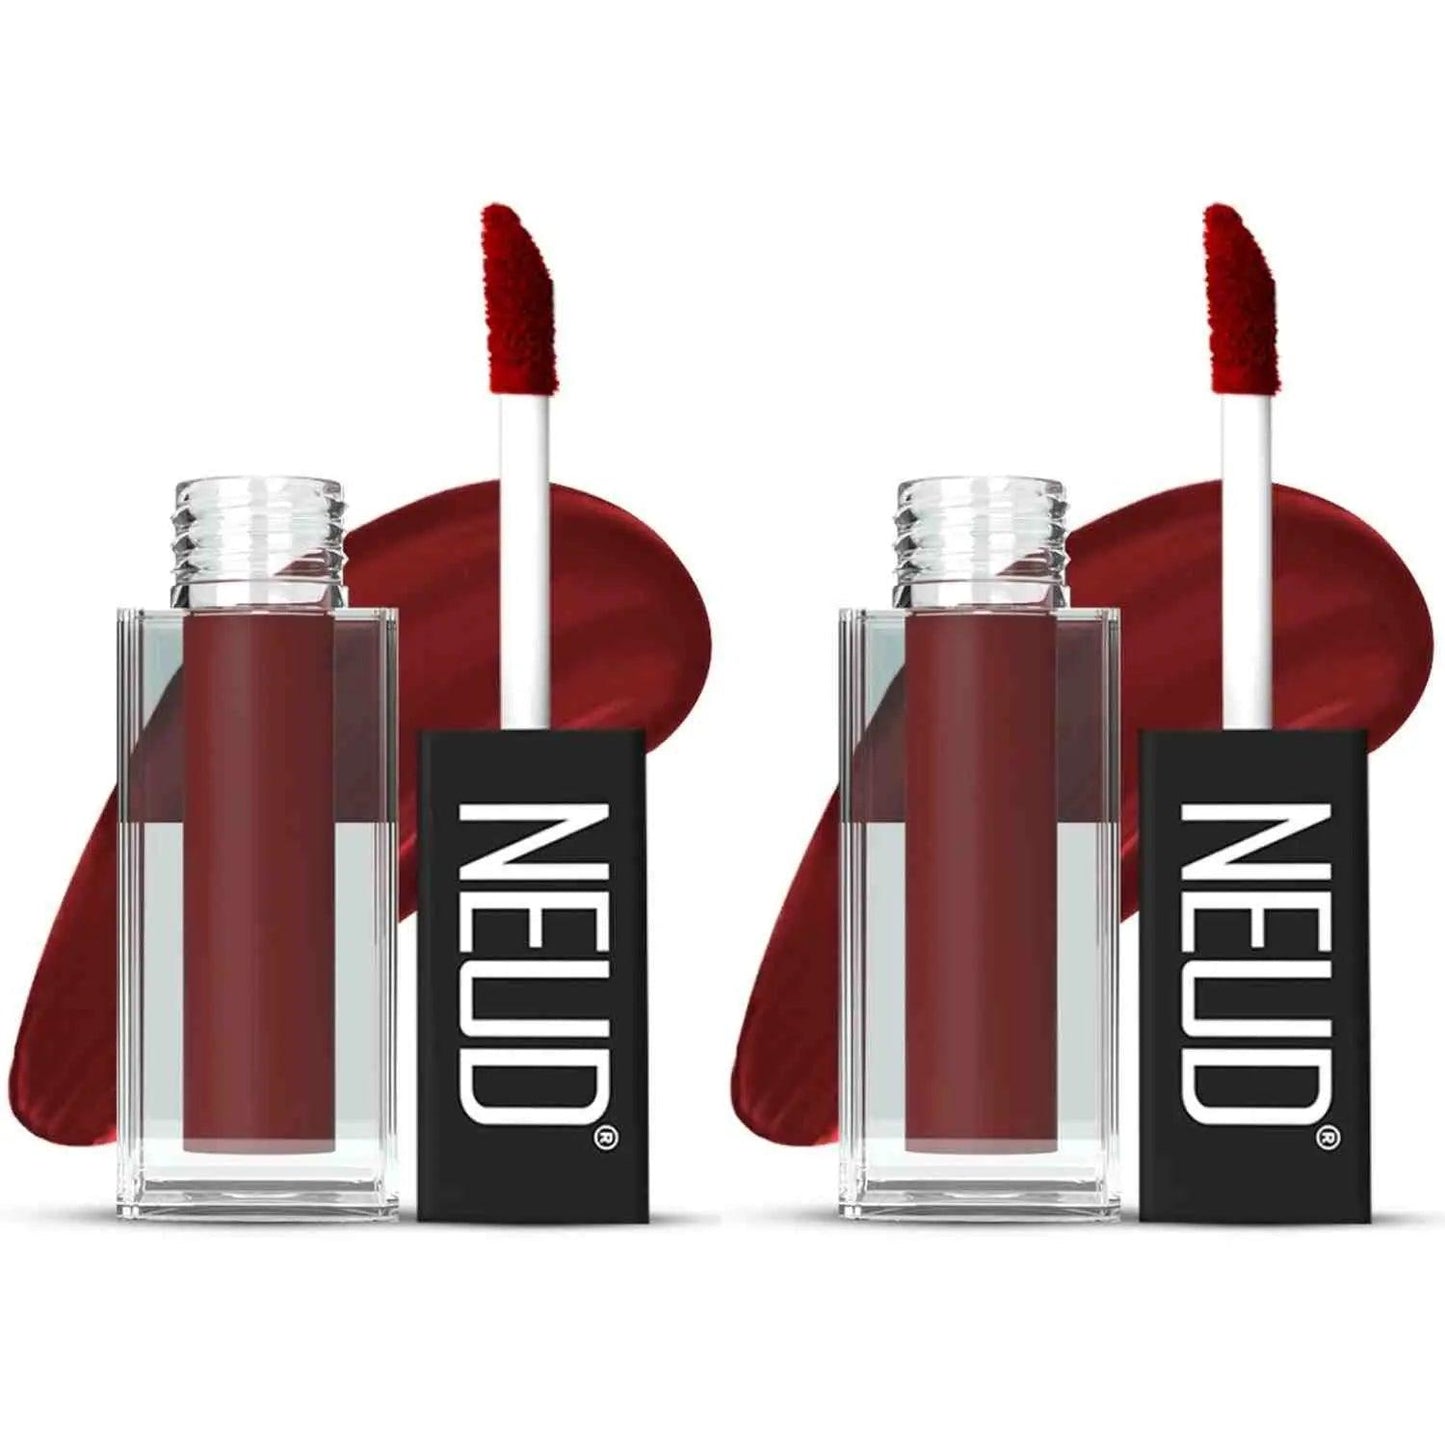 NEUD Matte Liquid Lipstick Red Kiss with Jojoba Oil, Vitamin E and Almond Oil - Smudge Proof 12-hour Stay Formula with Free Lip Gloss 7419870371937